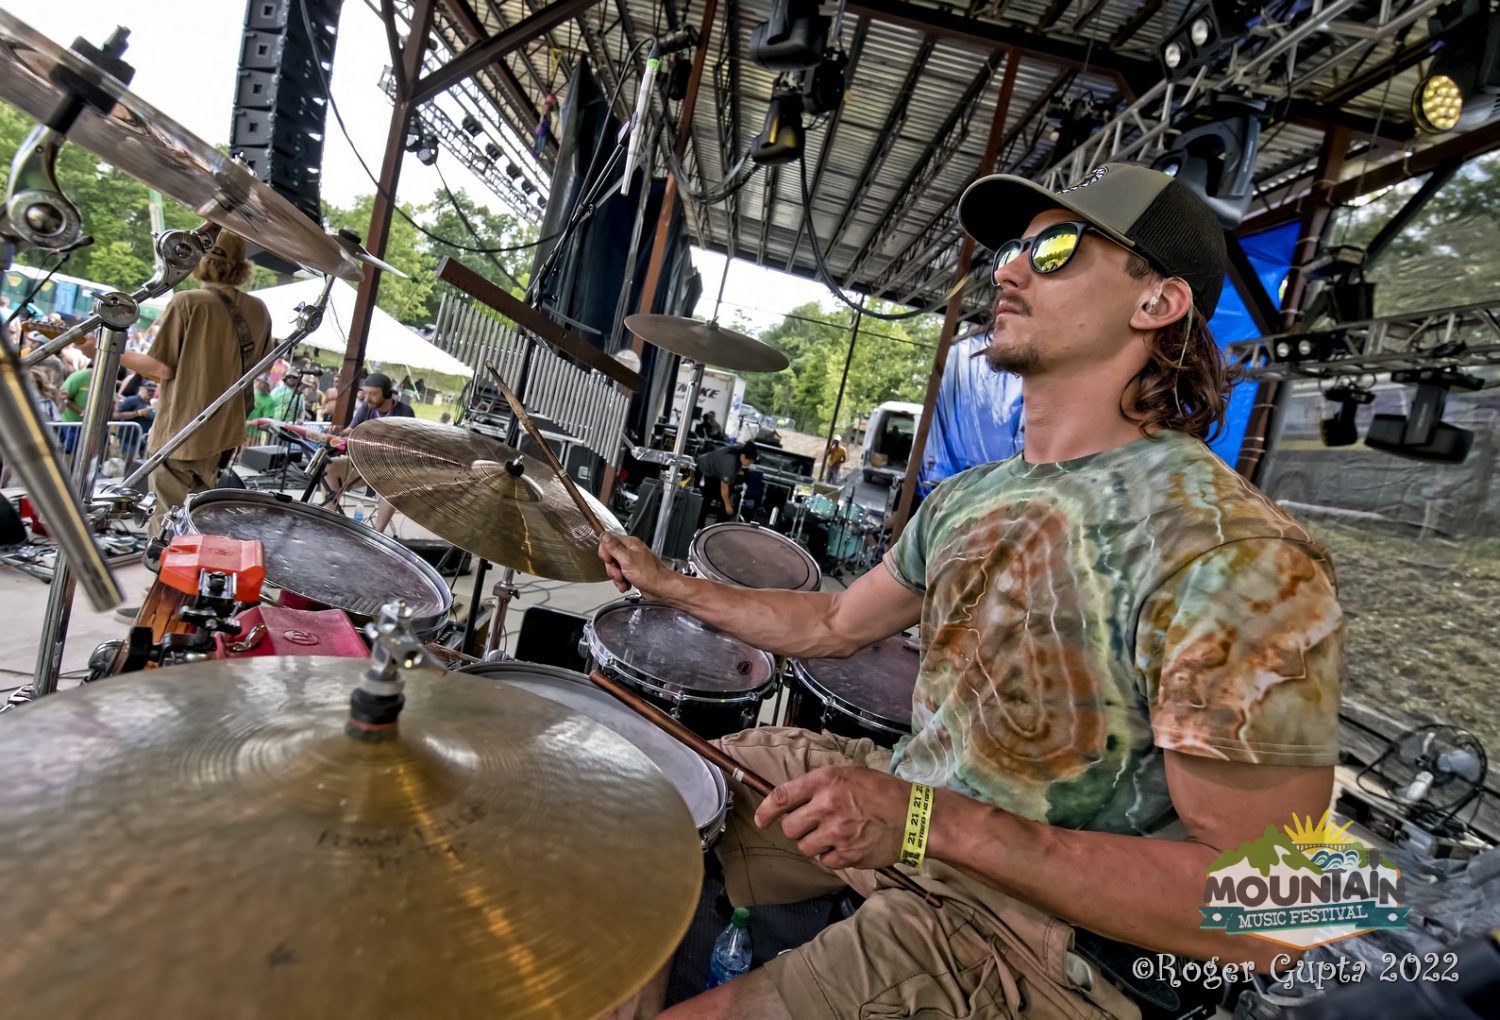 Drummer on stage at festival